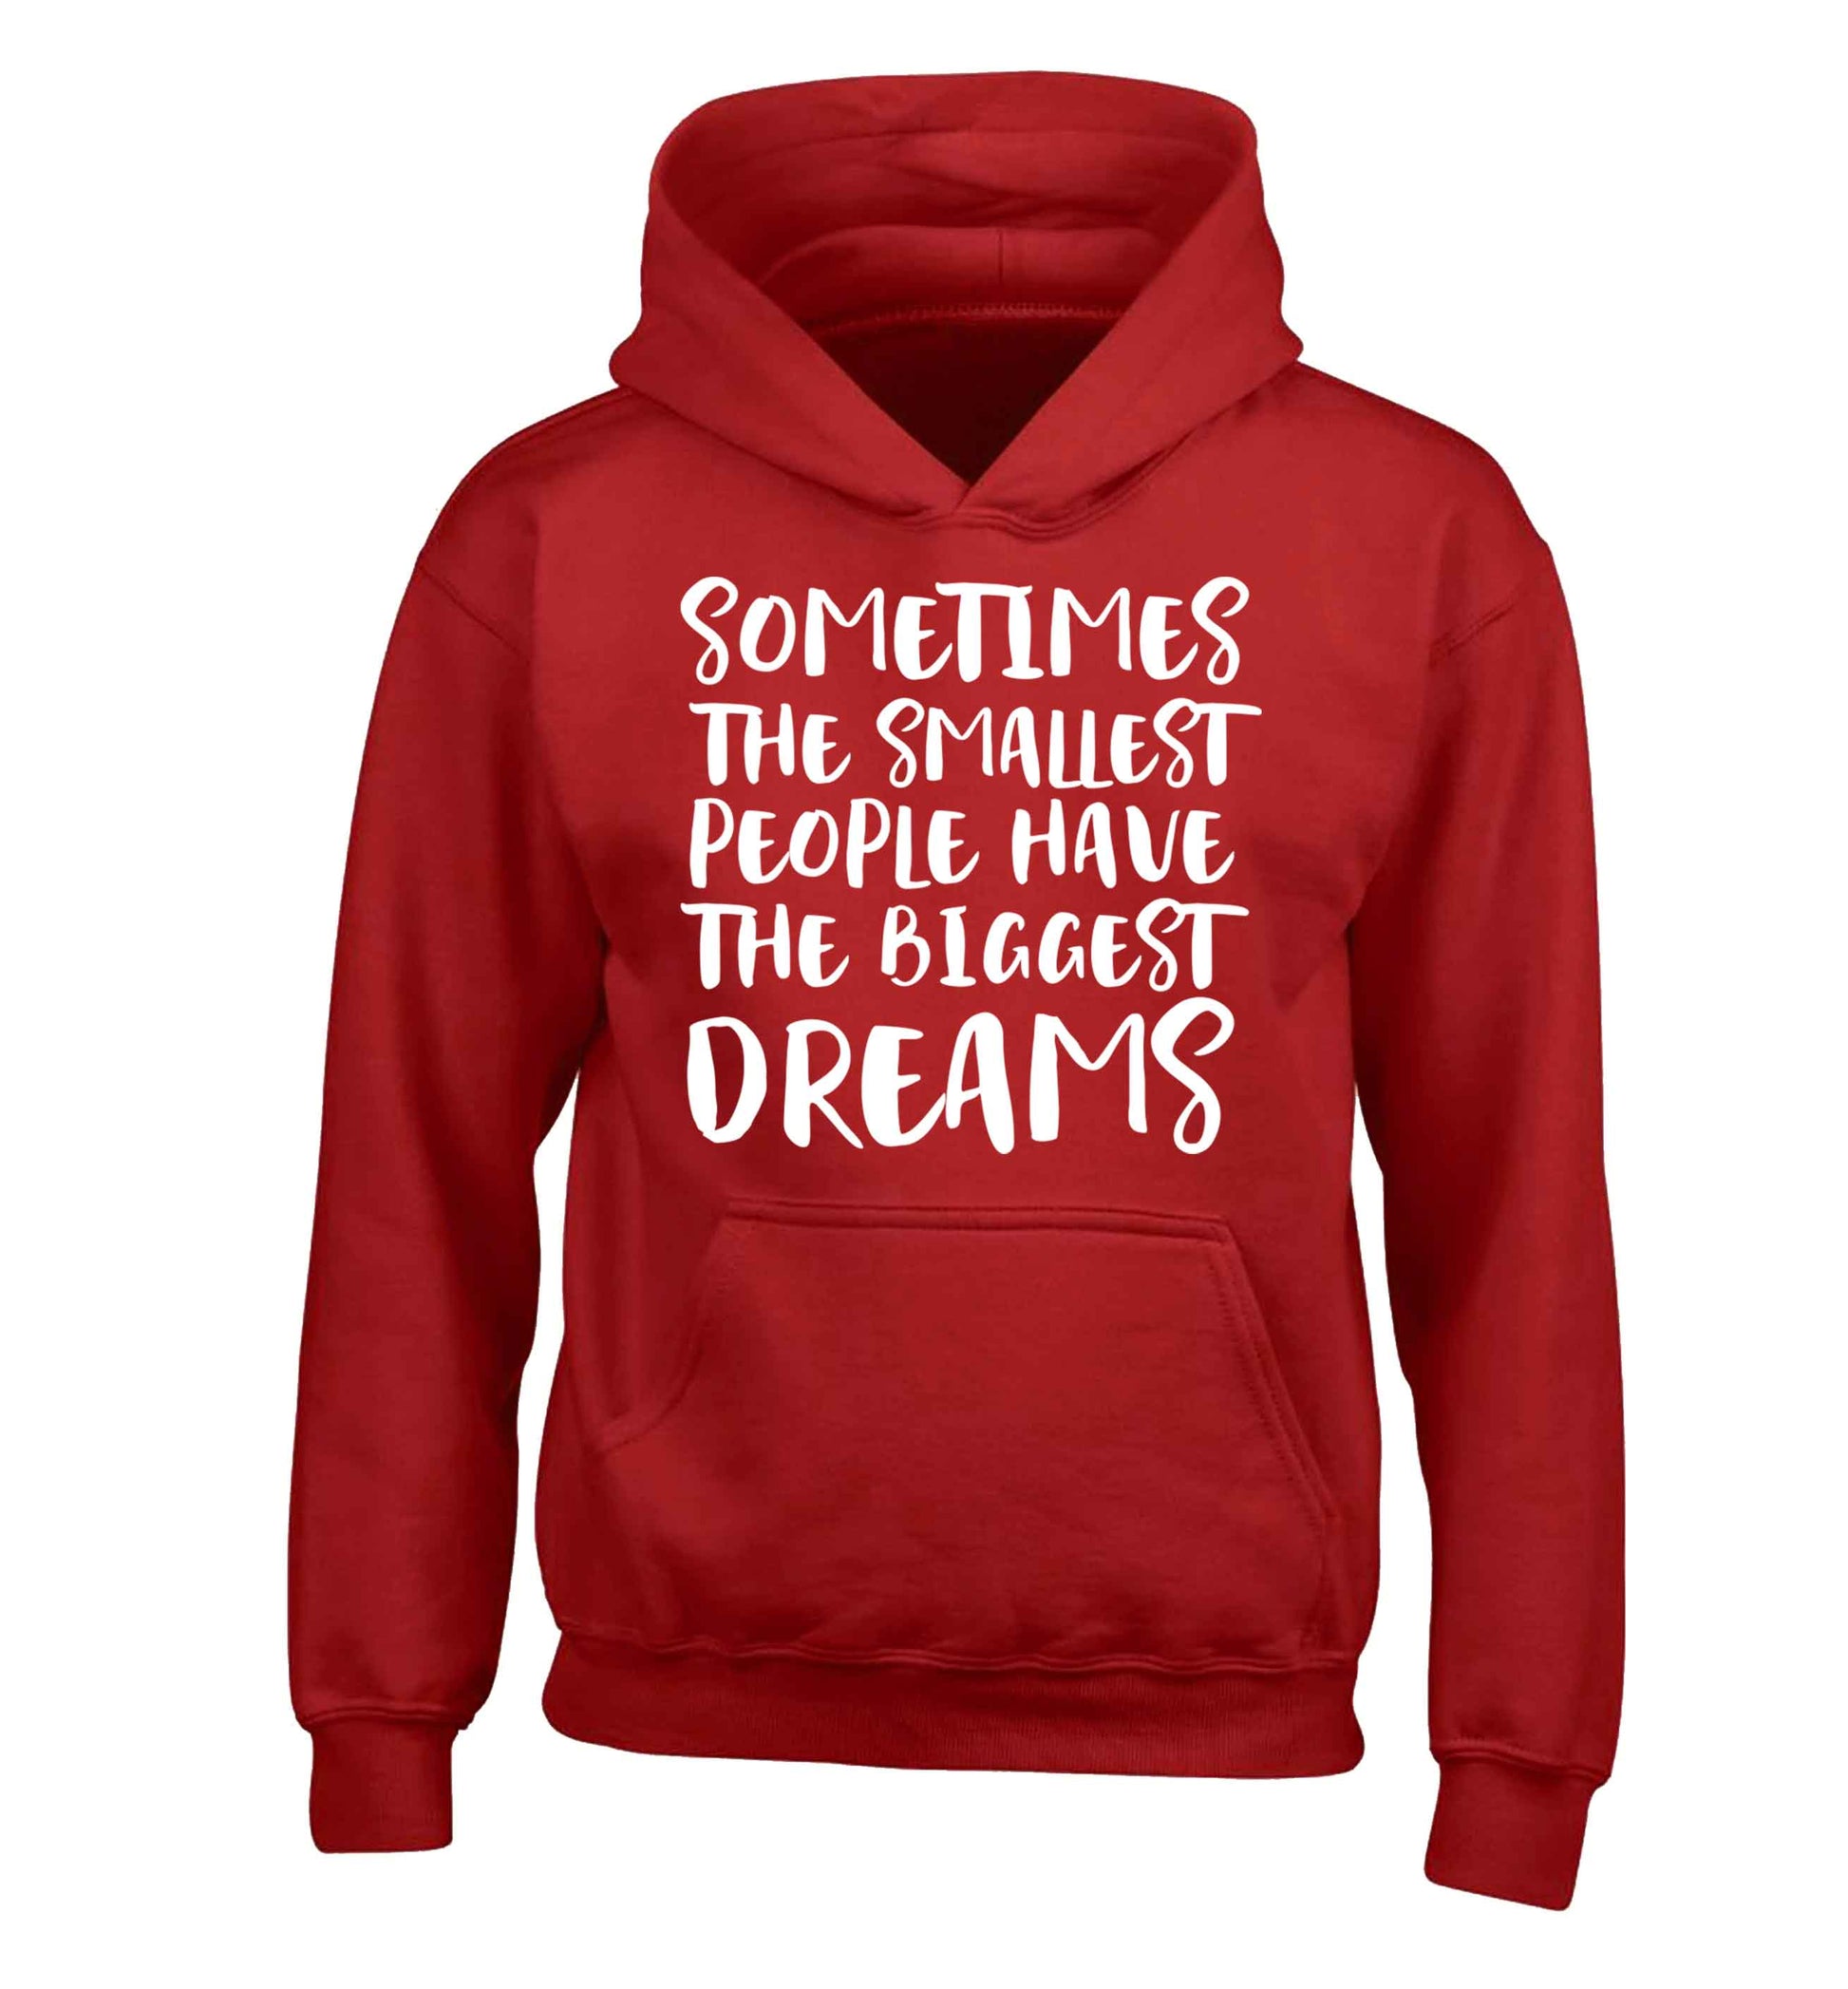 Sometimes the smallest people have the biggest dreams children's red hoodie 12-13 Years